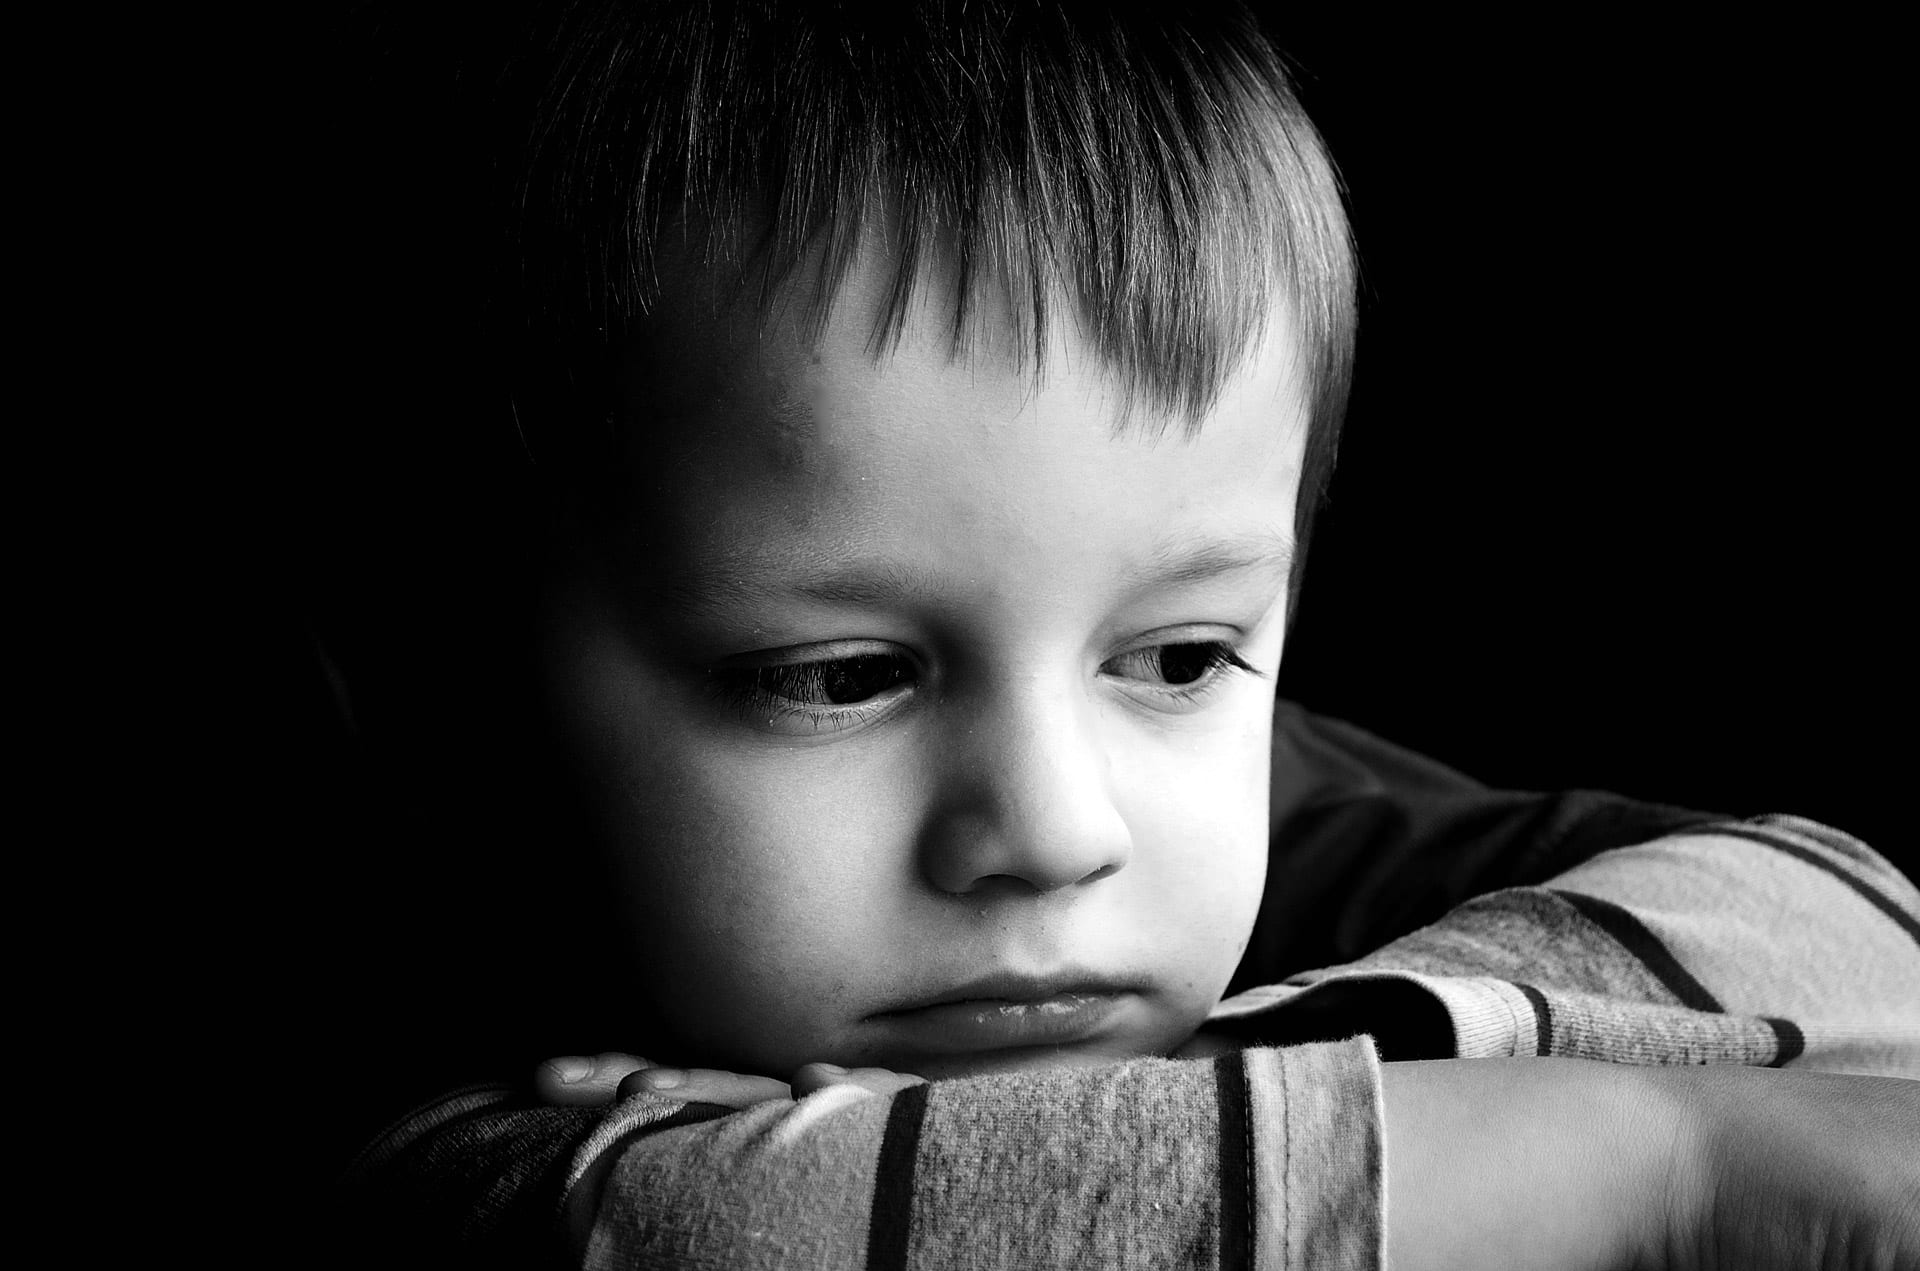 Sad little boy in black and white